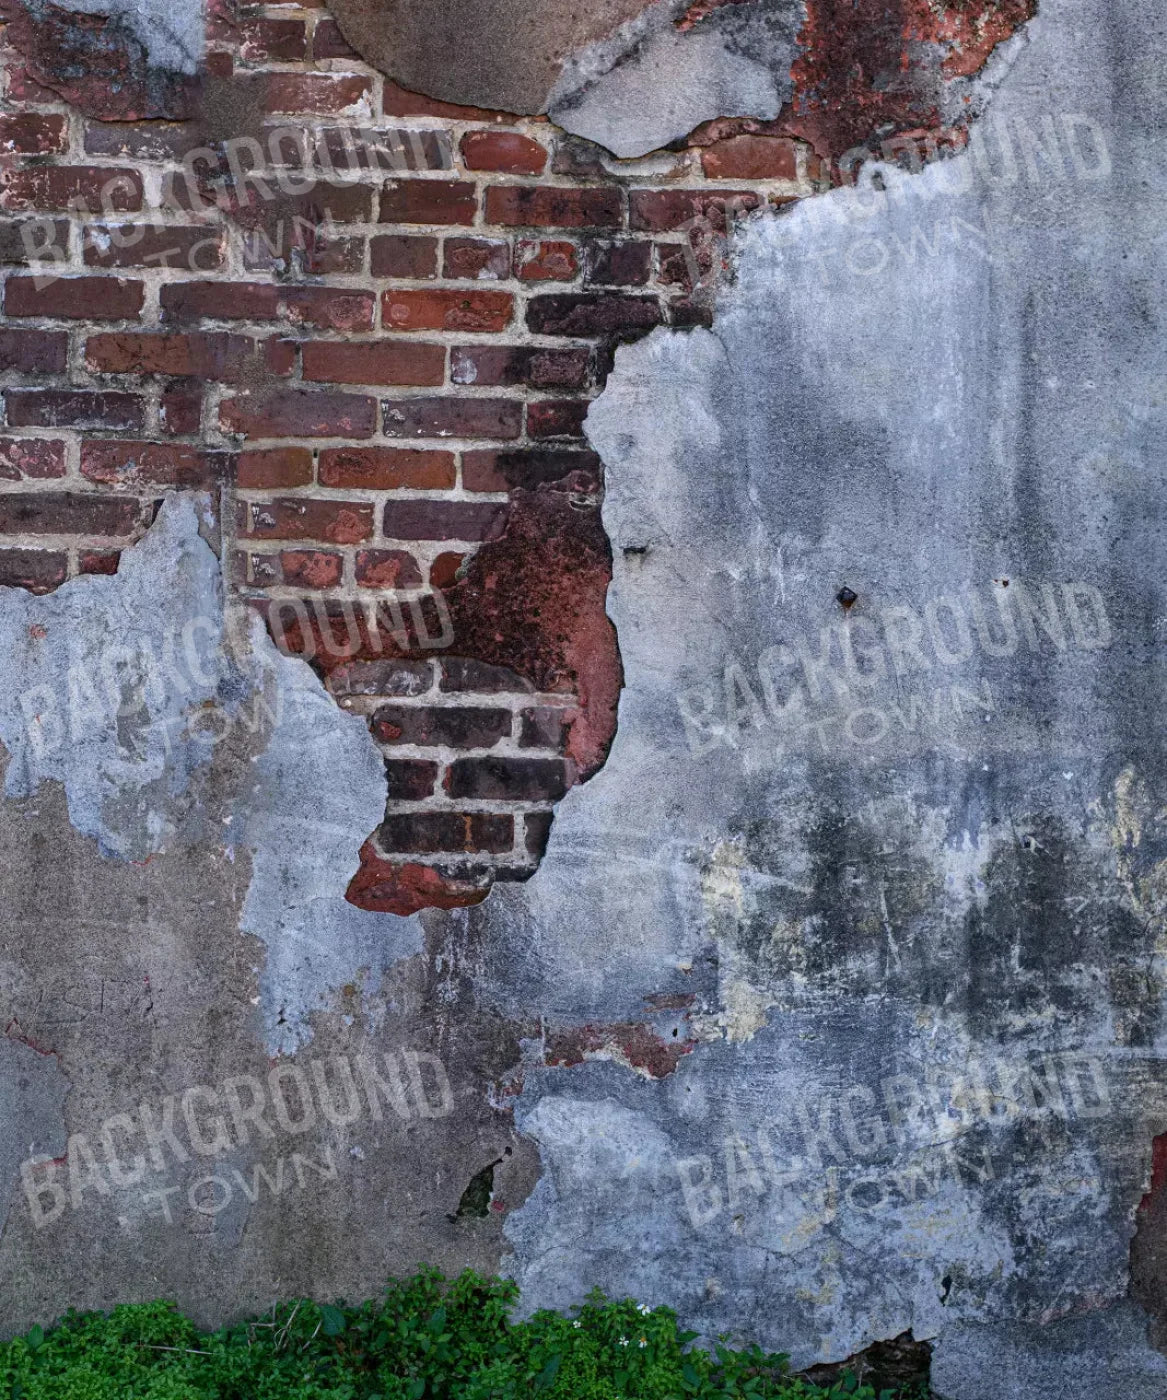 Gray Brick and Stone Backdrop for Photography